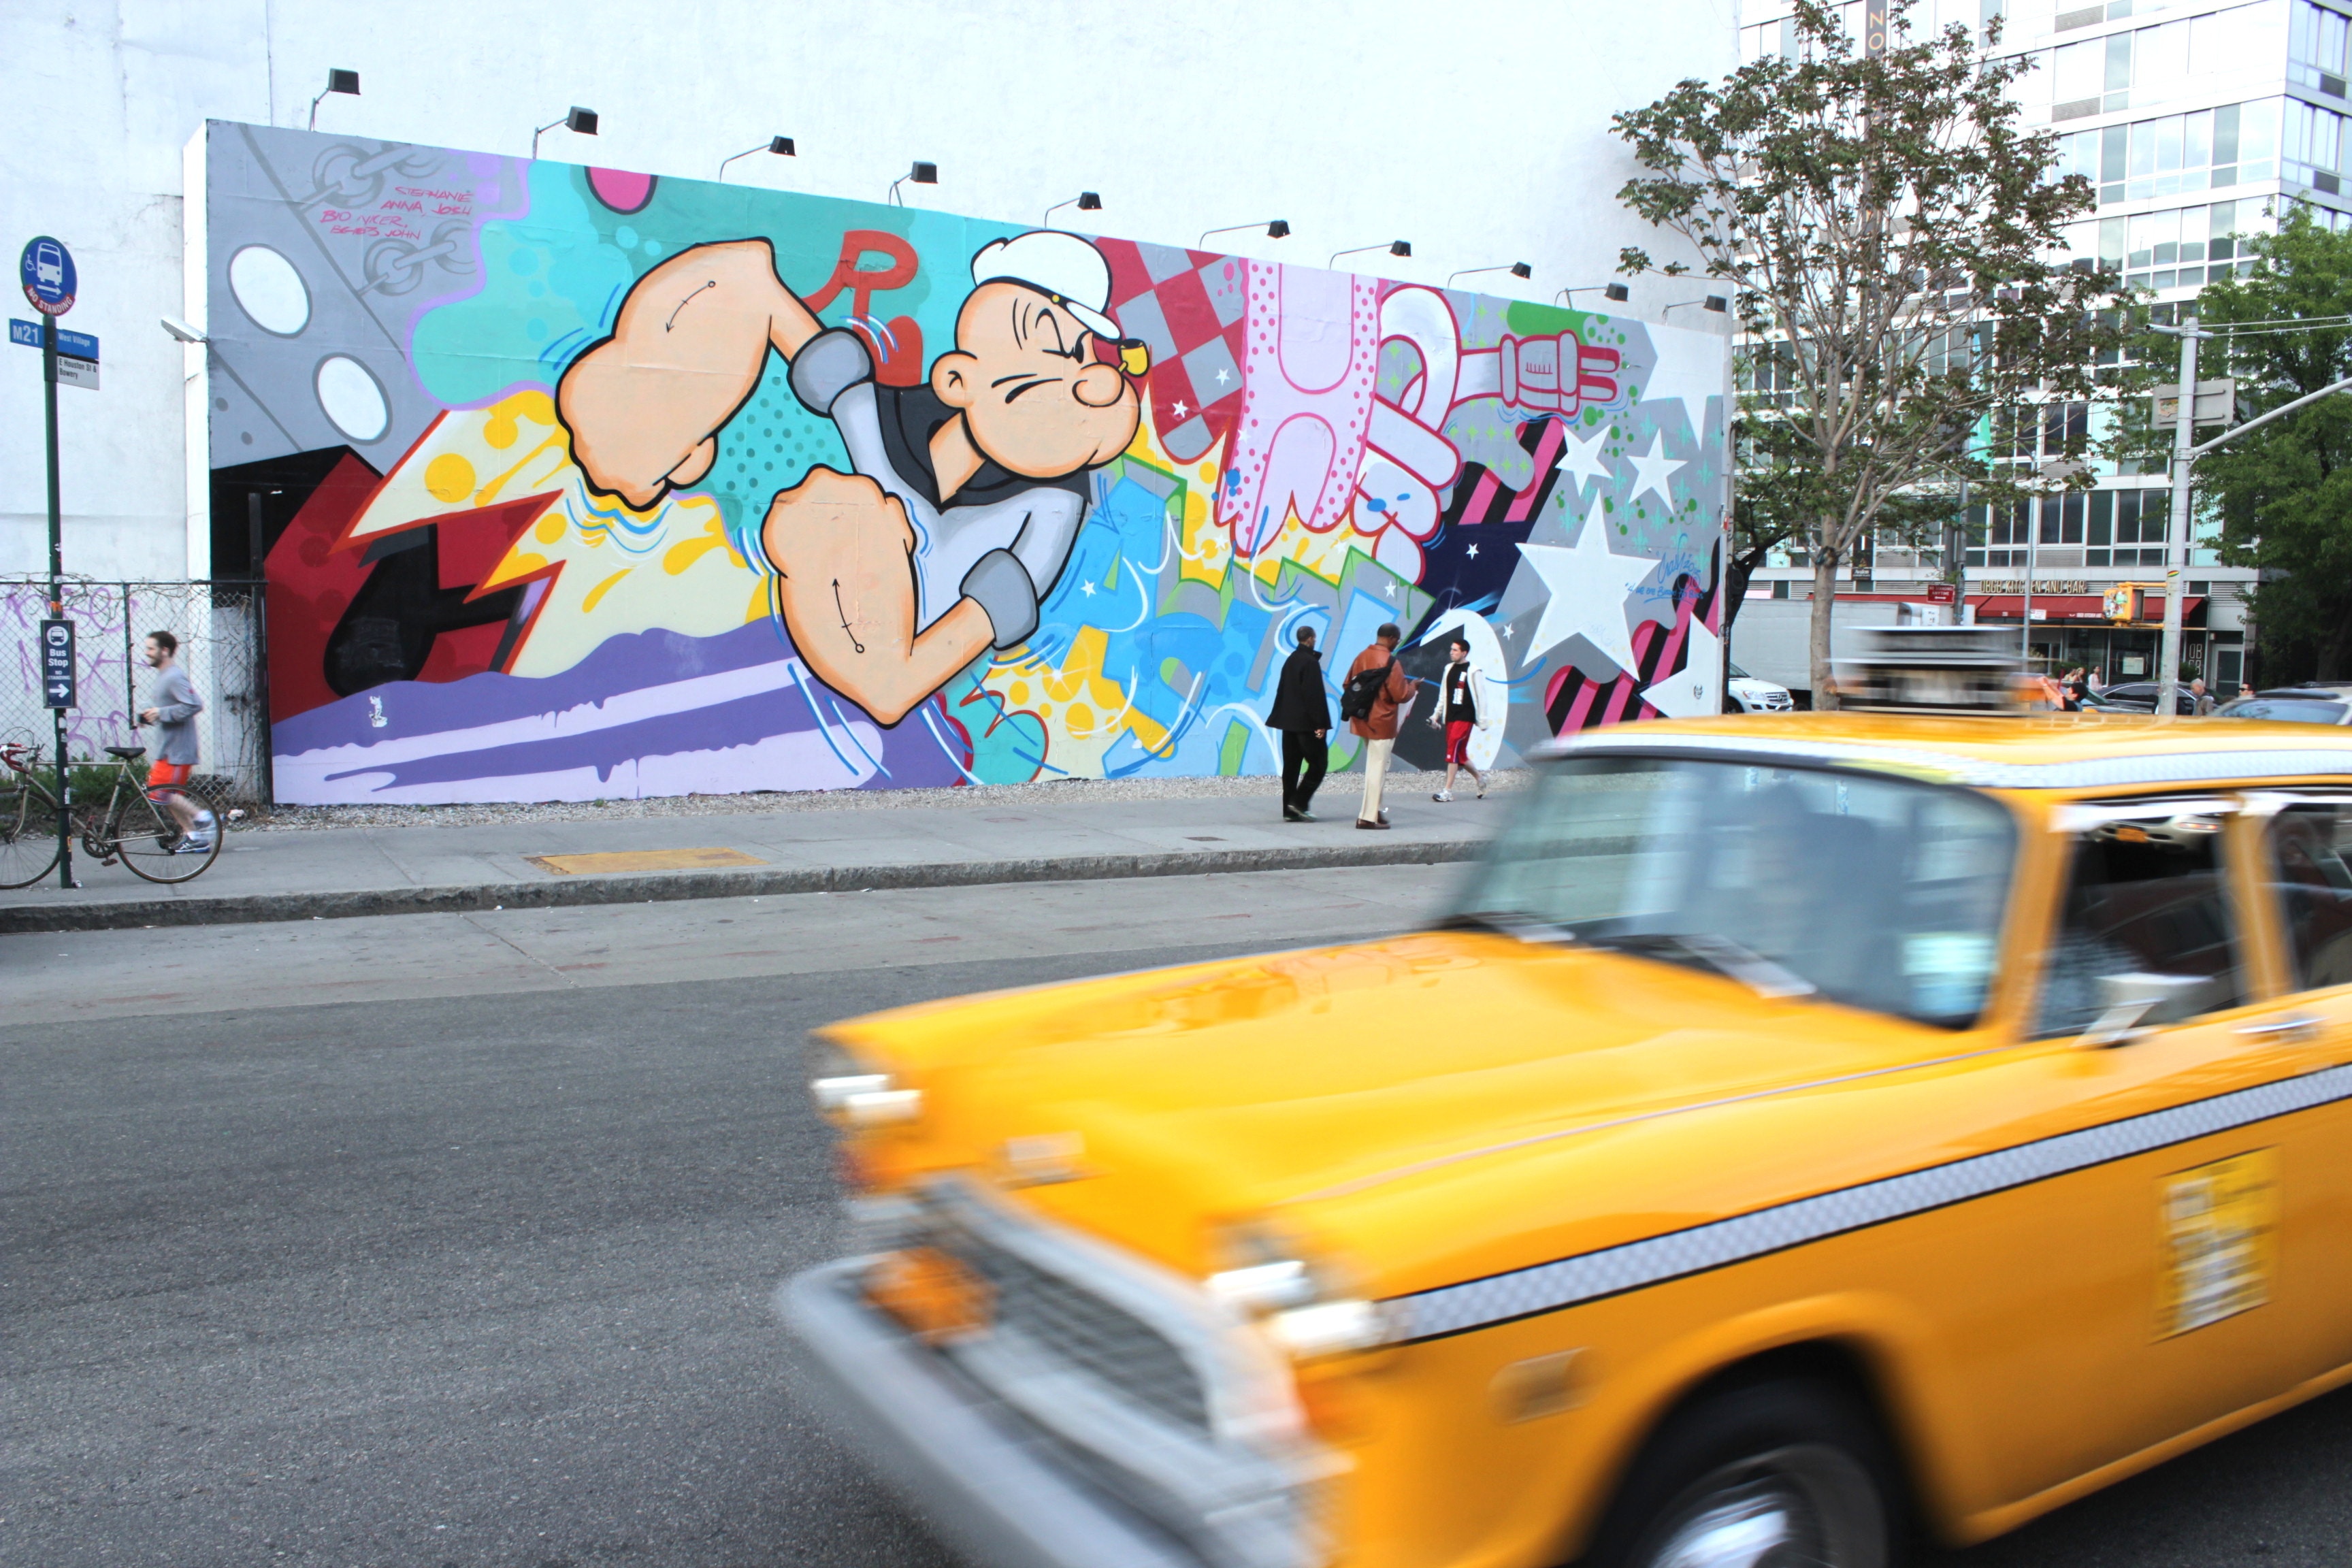 Checker cab in NYC in front of mural